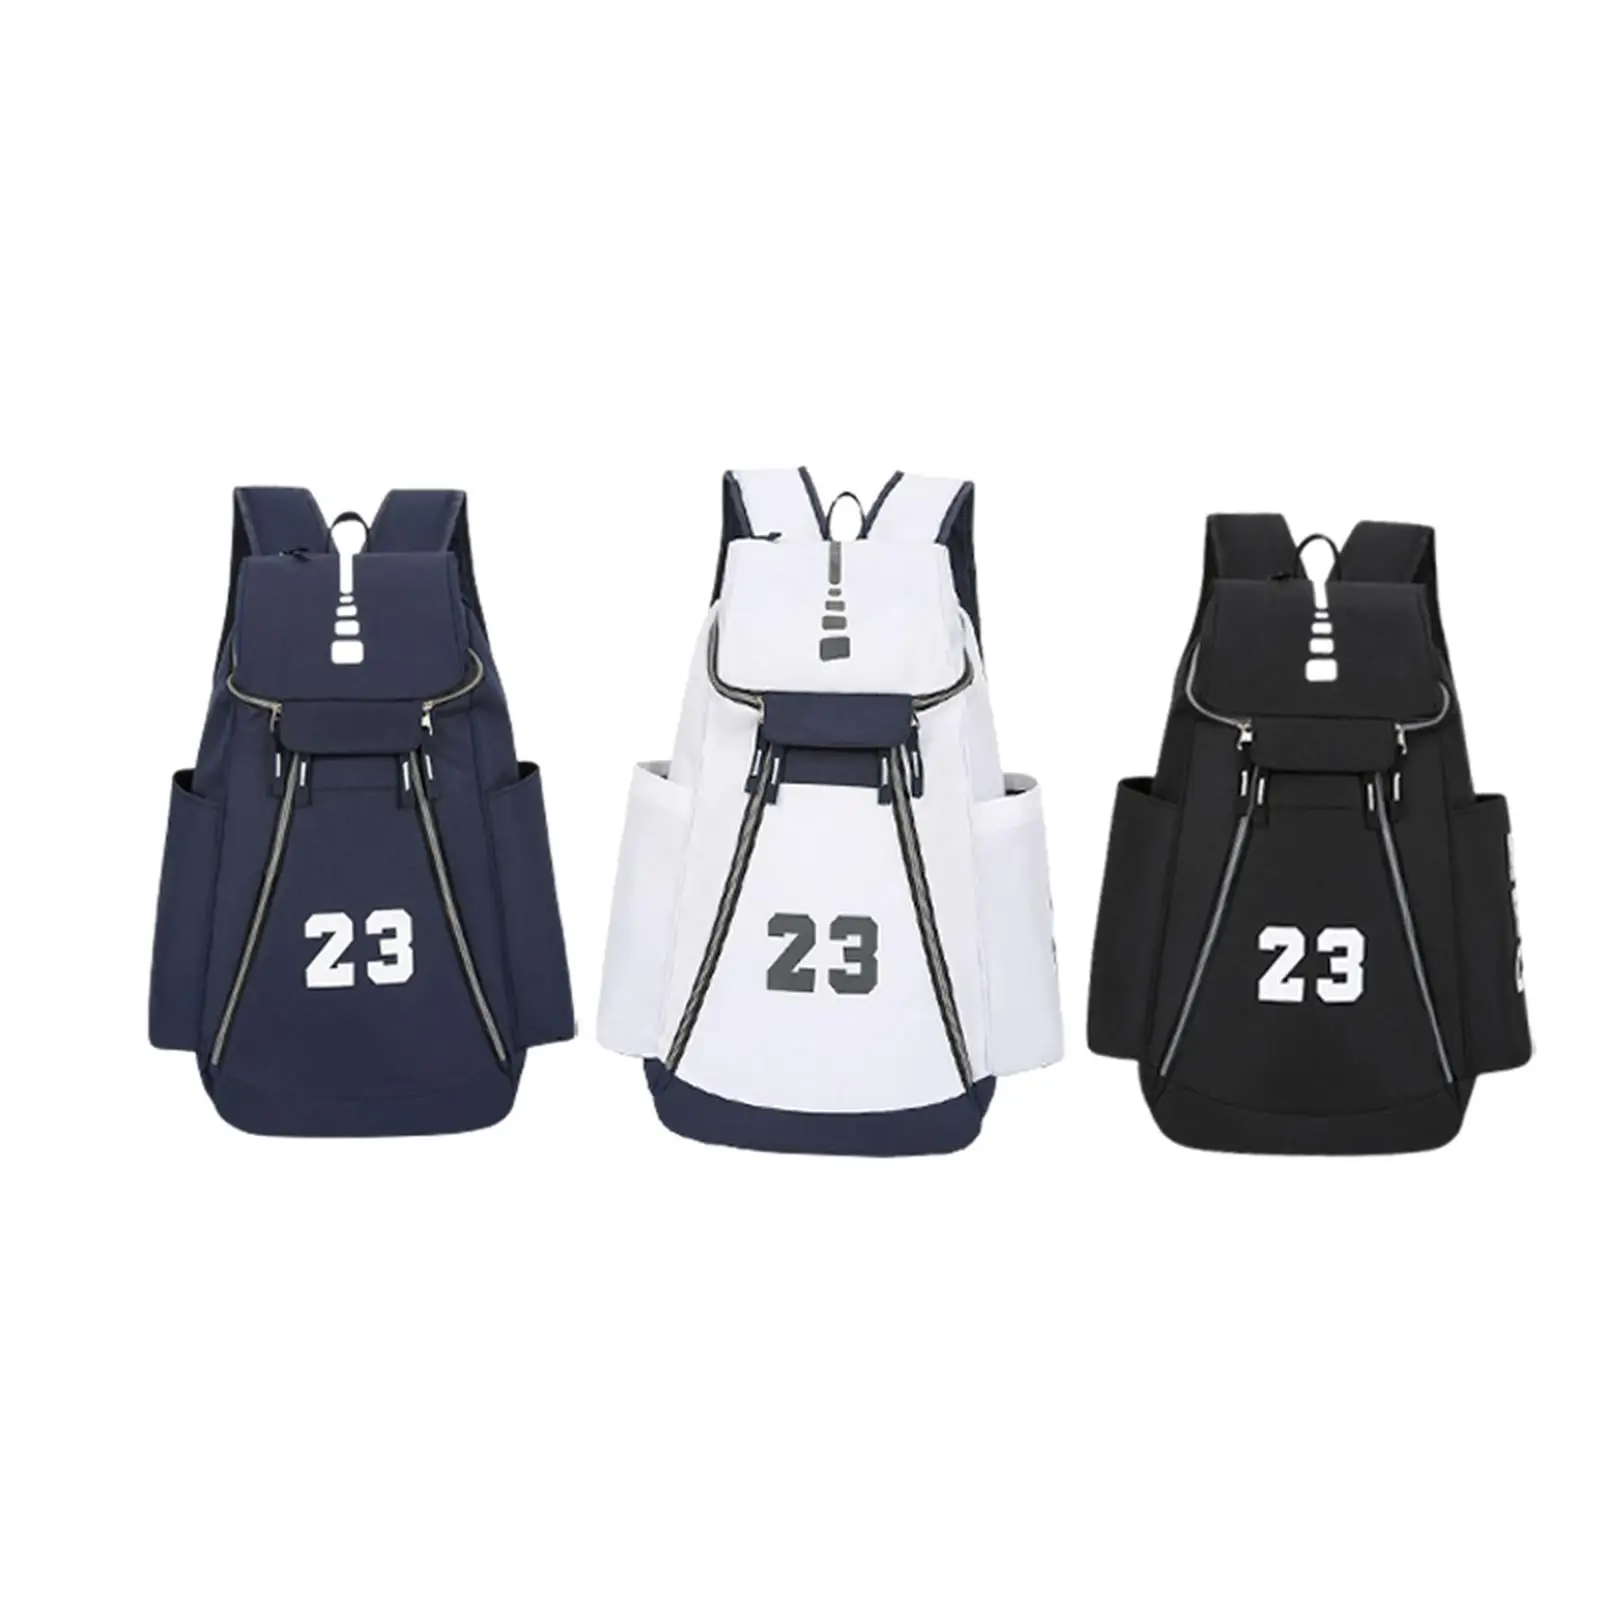 Oxford Cloth Basketball Backpack Adjustable Straps Daypack Durable sports Shoulder Bag for Running Cycling Yoga School